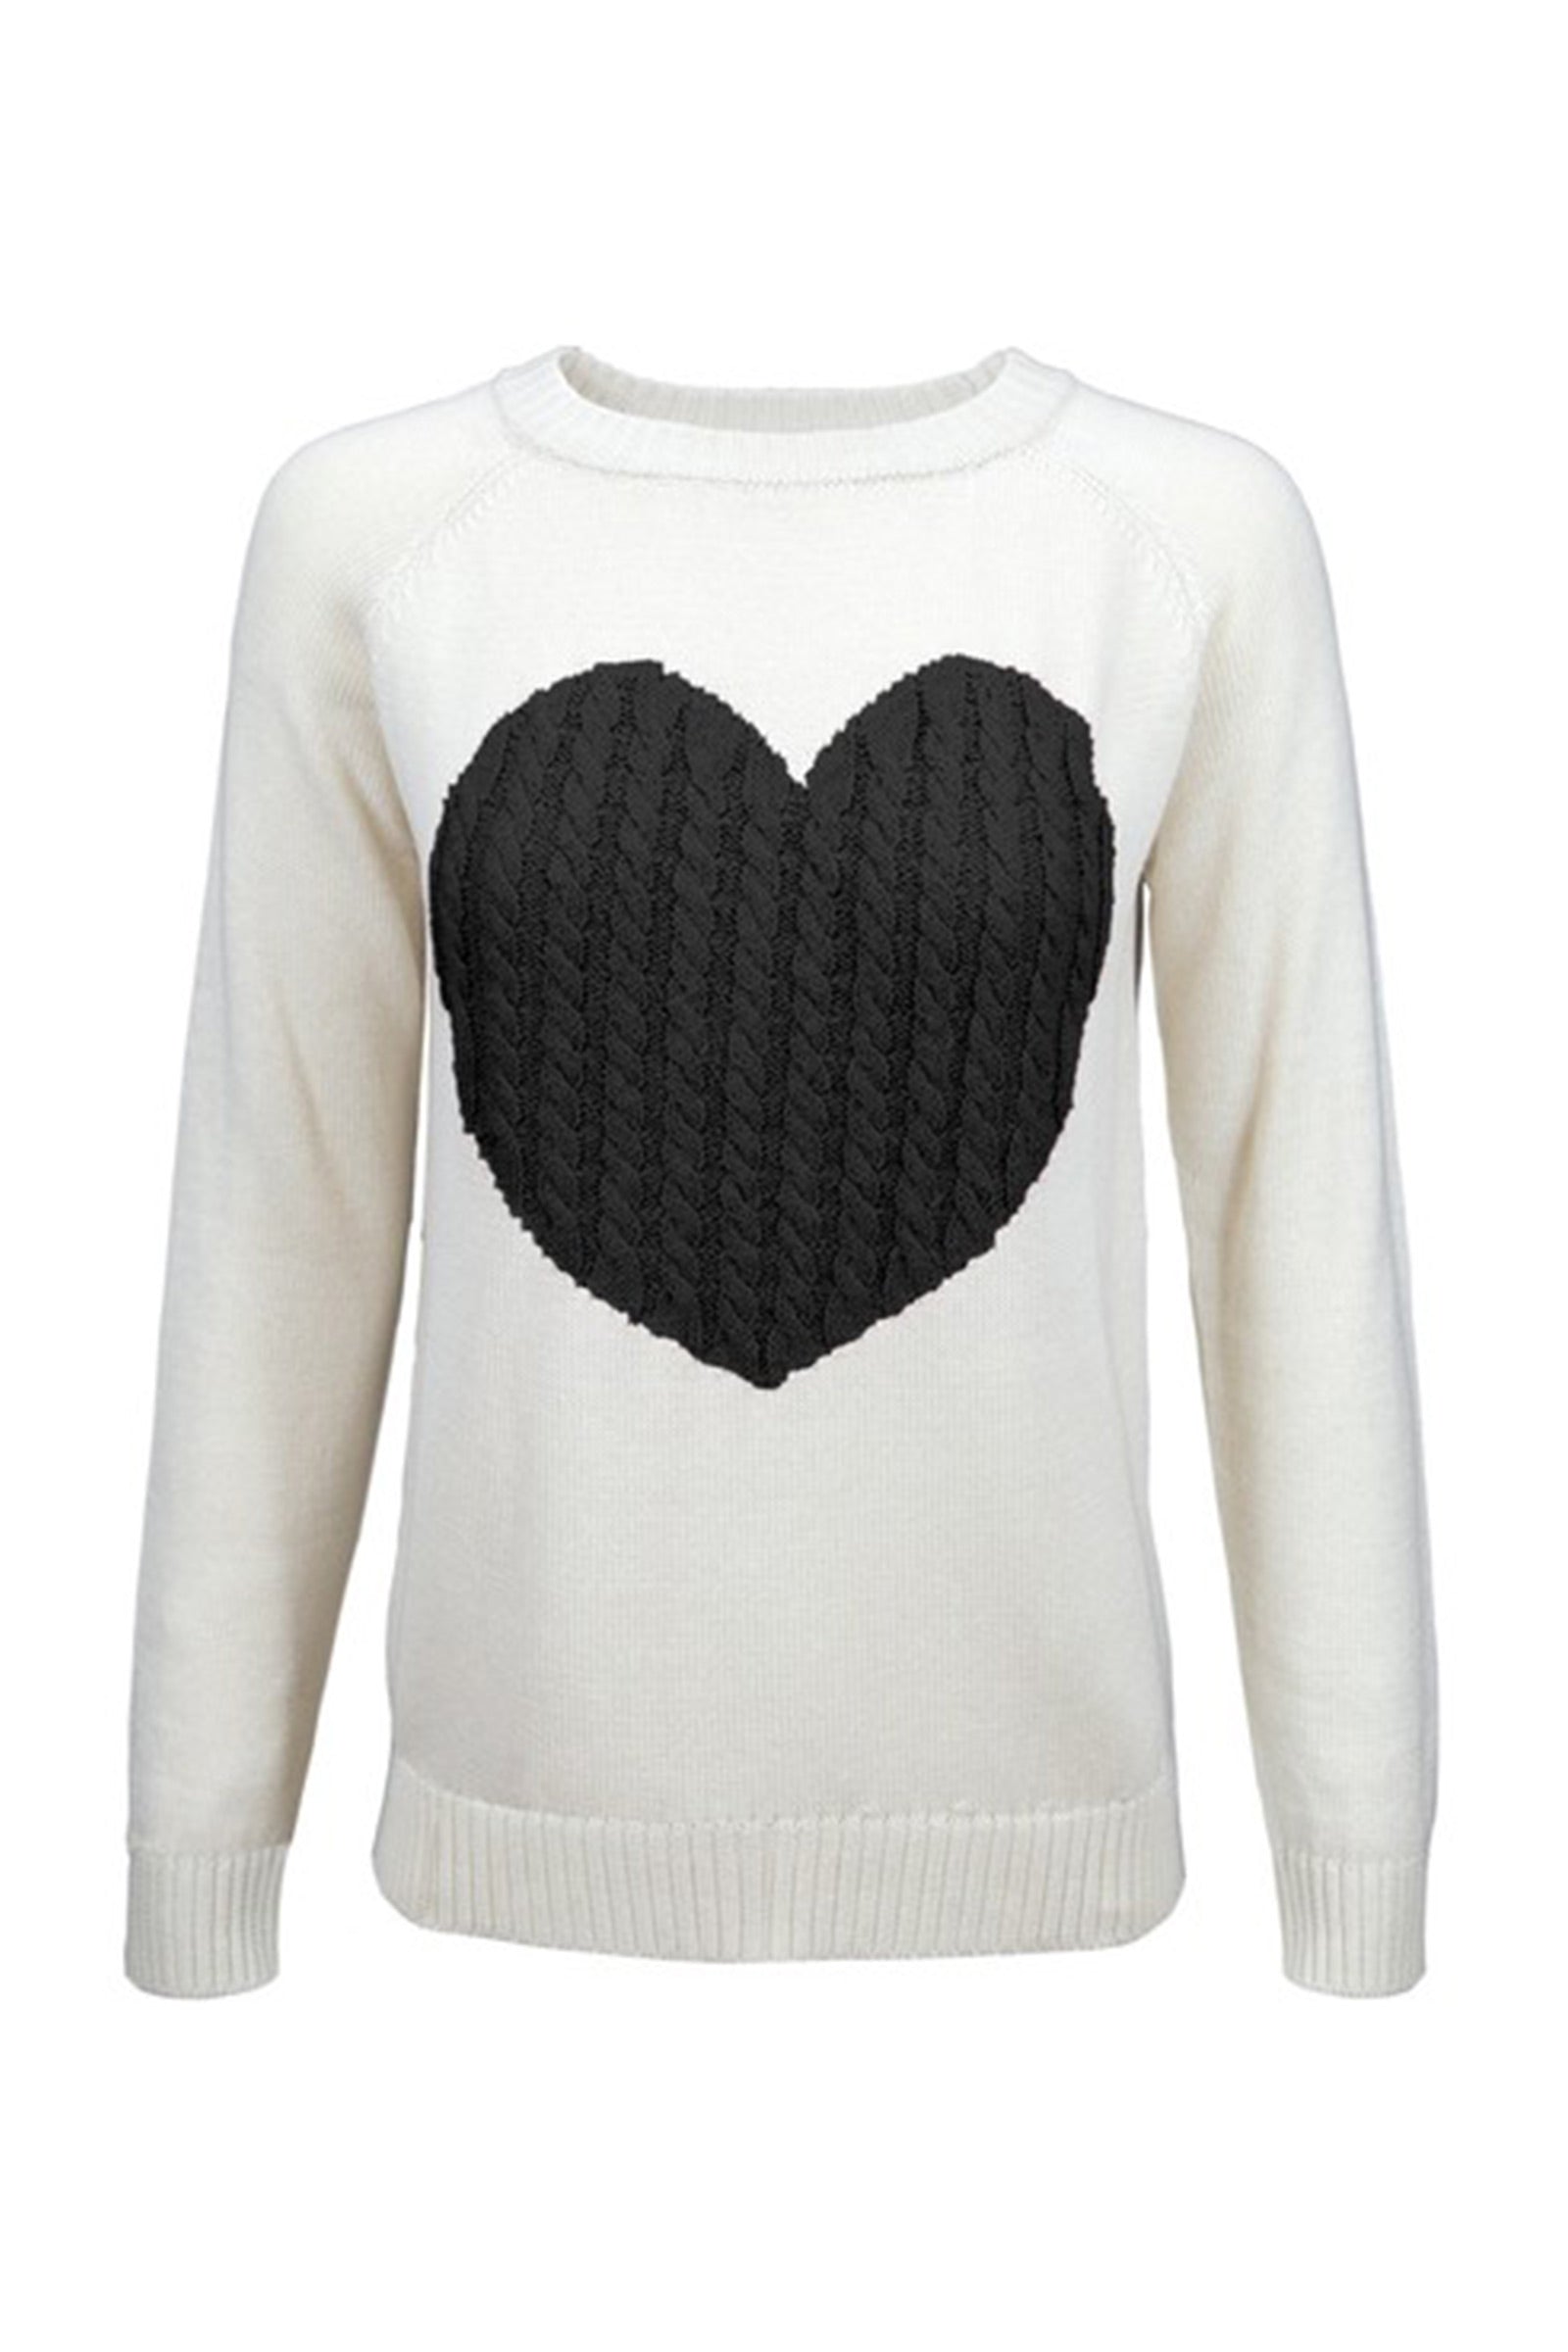 Follow Your Heart Sweaters - Closet Candy Boutique